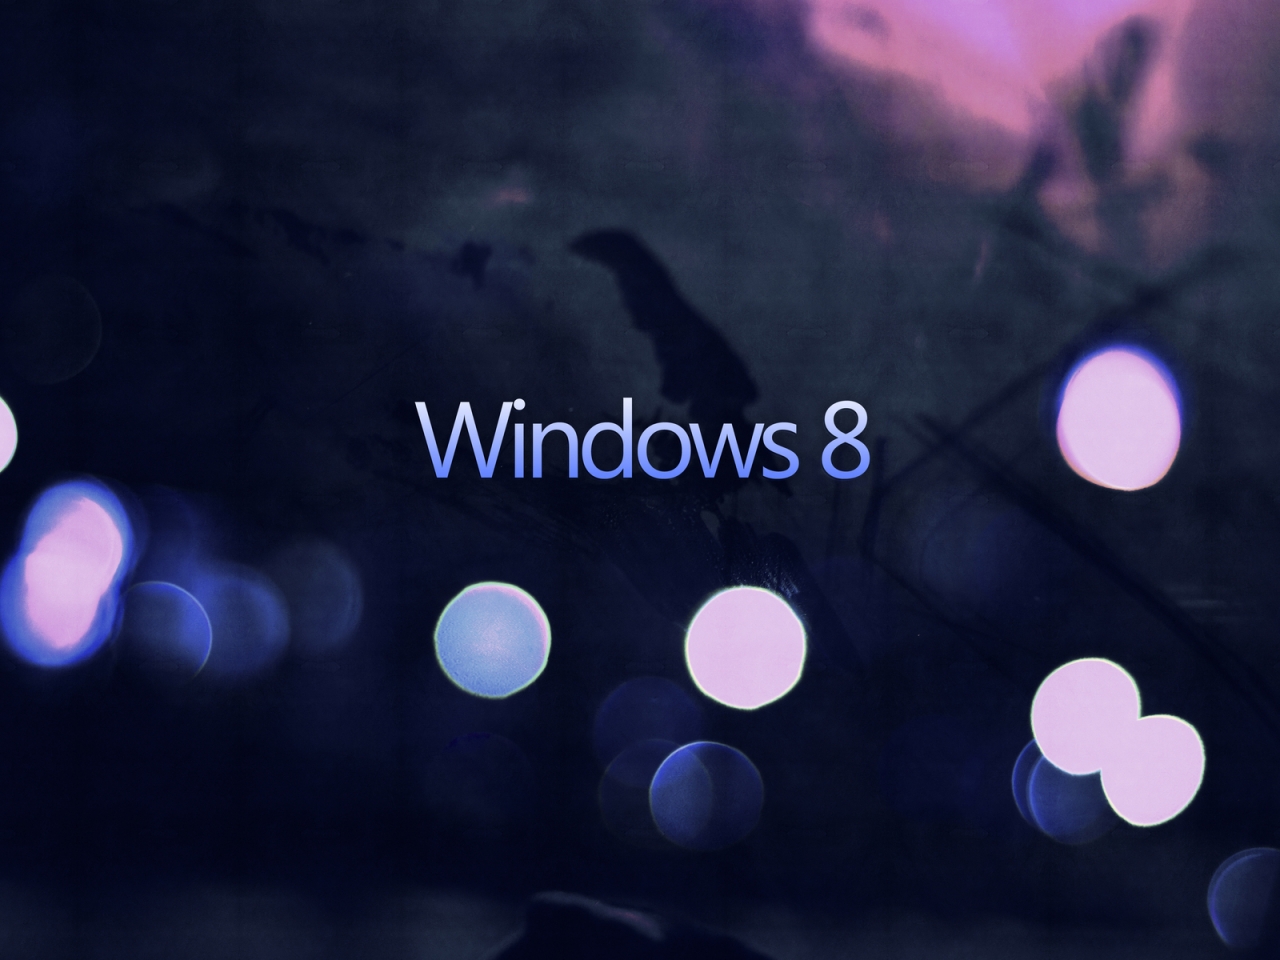 Simple Windows 8 for 1280 x 960 resolution